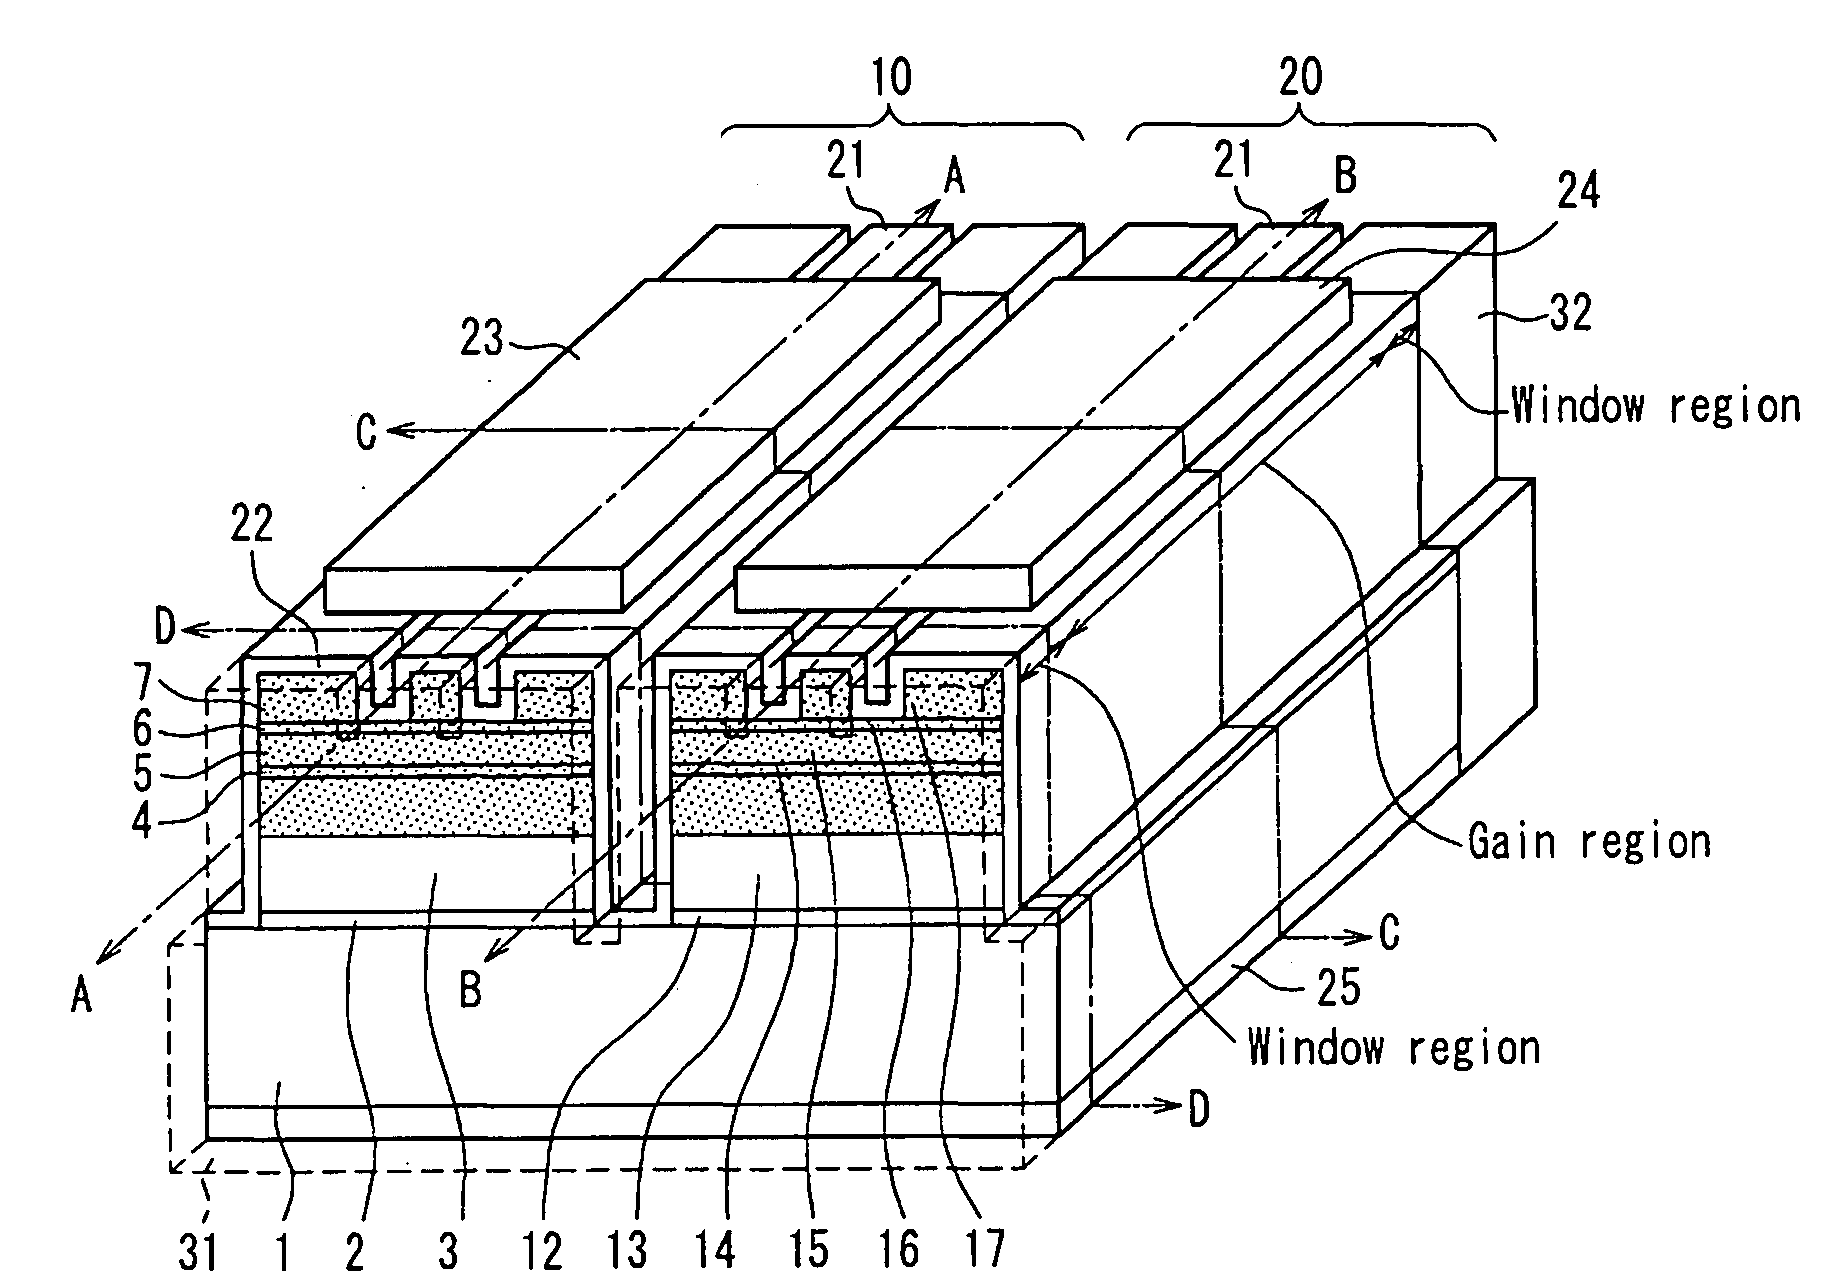 Semiconductor laser device and method for manufacturing the same